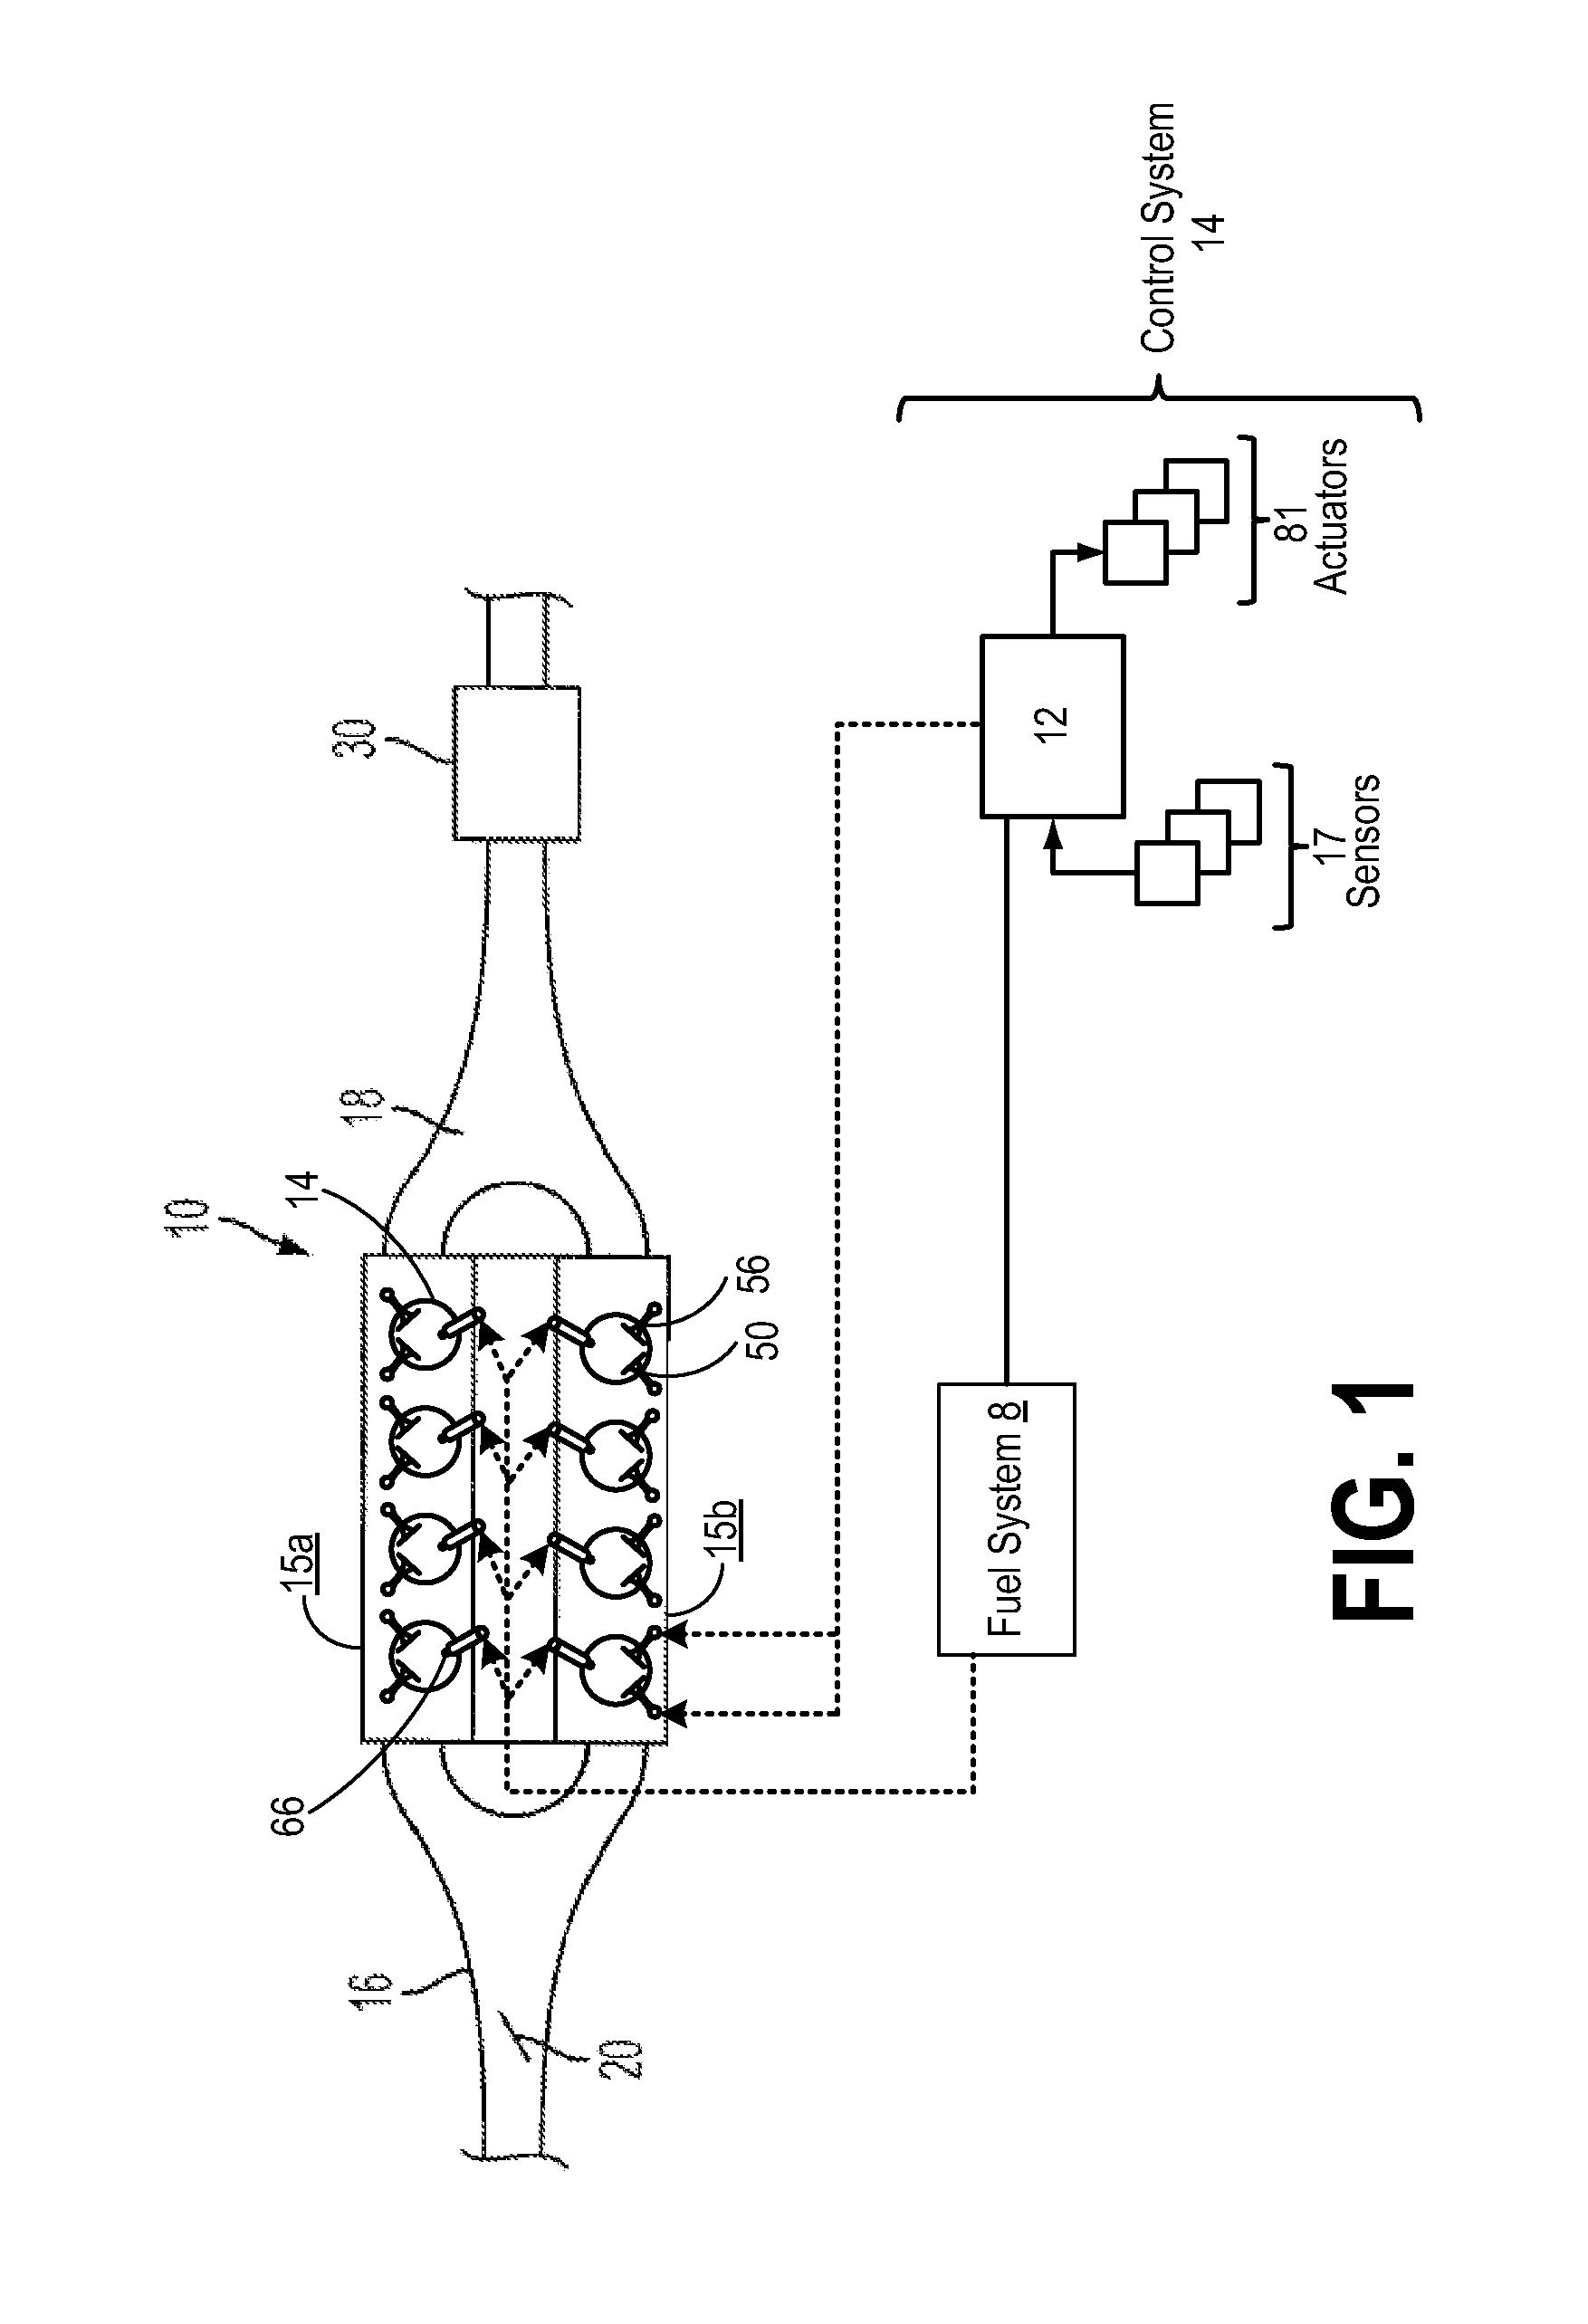 Method and system for engine temperature control